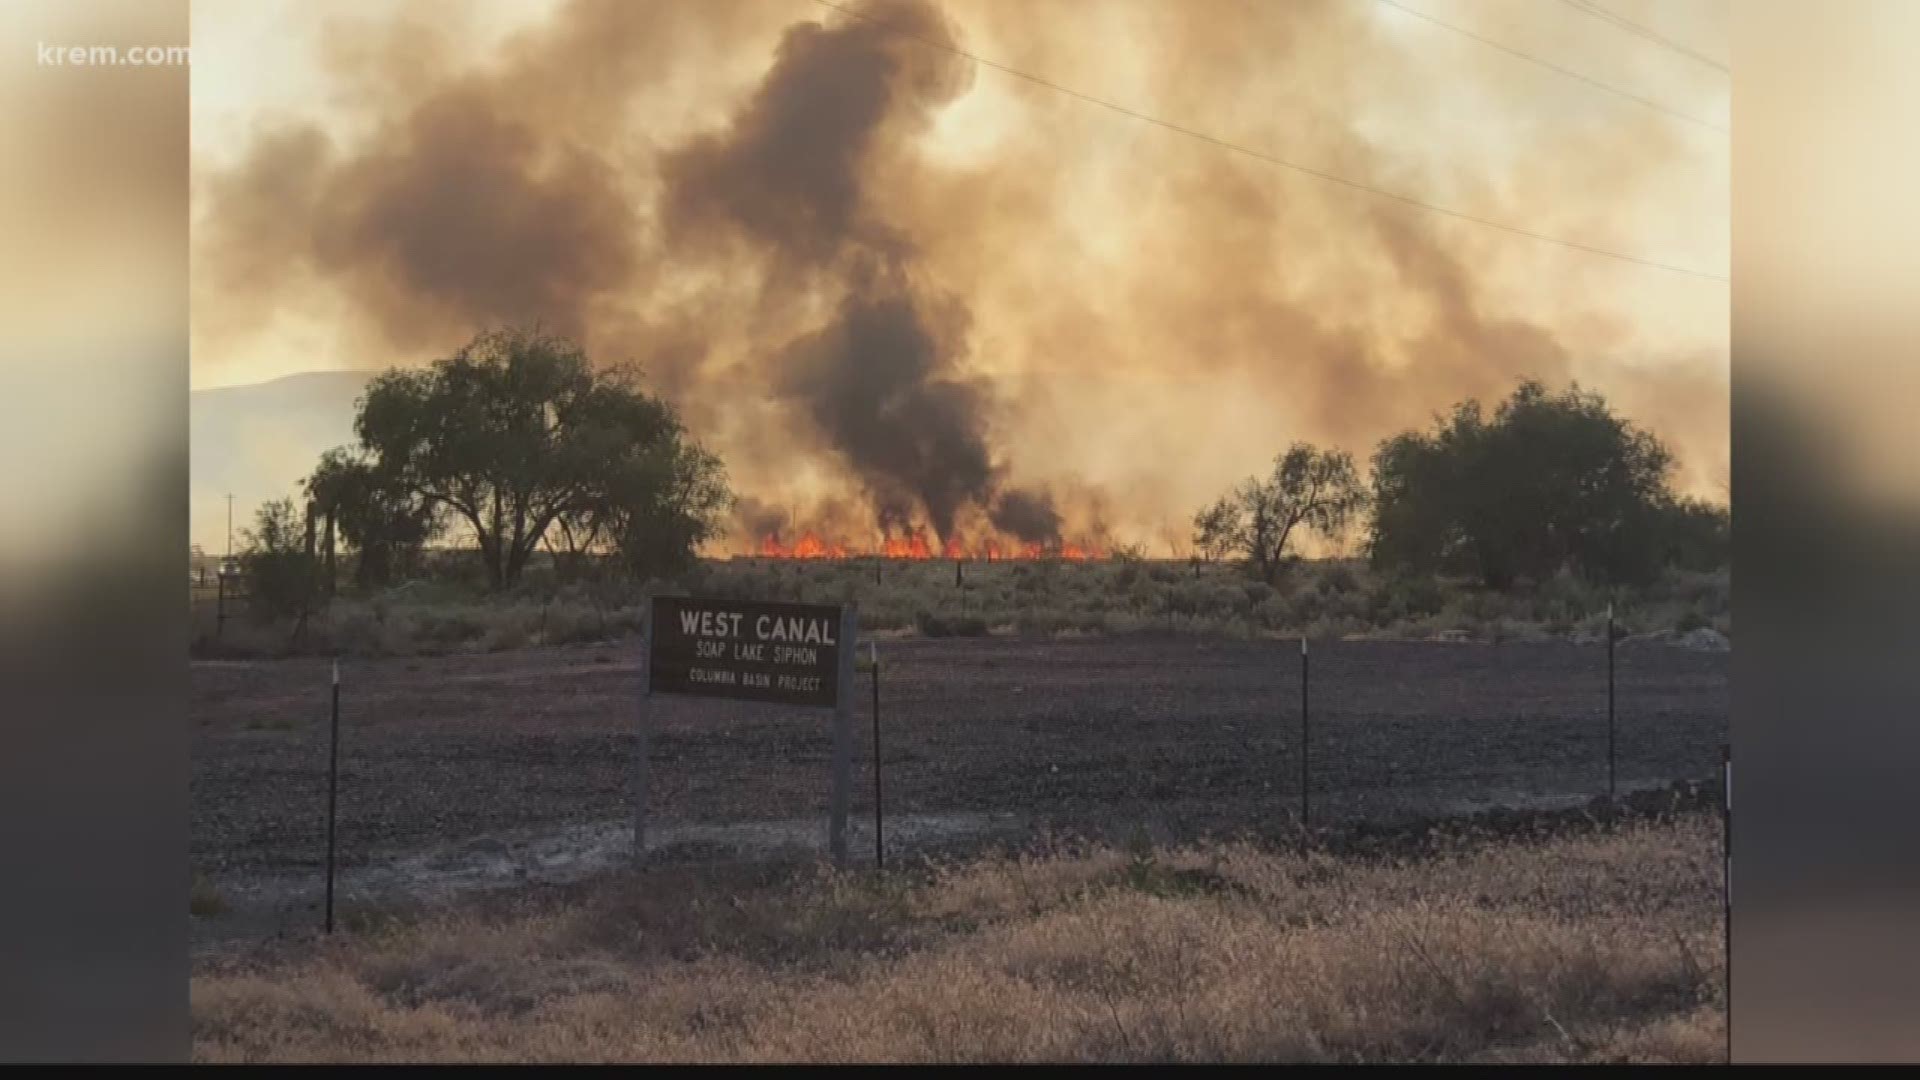 Officials canceled a level 3 evacuation notice that was issued to Grant County residents near a wildfire that has burned parts of State Route 17 Saturday afternoon, according to Grant County Sheriff's Office reports.